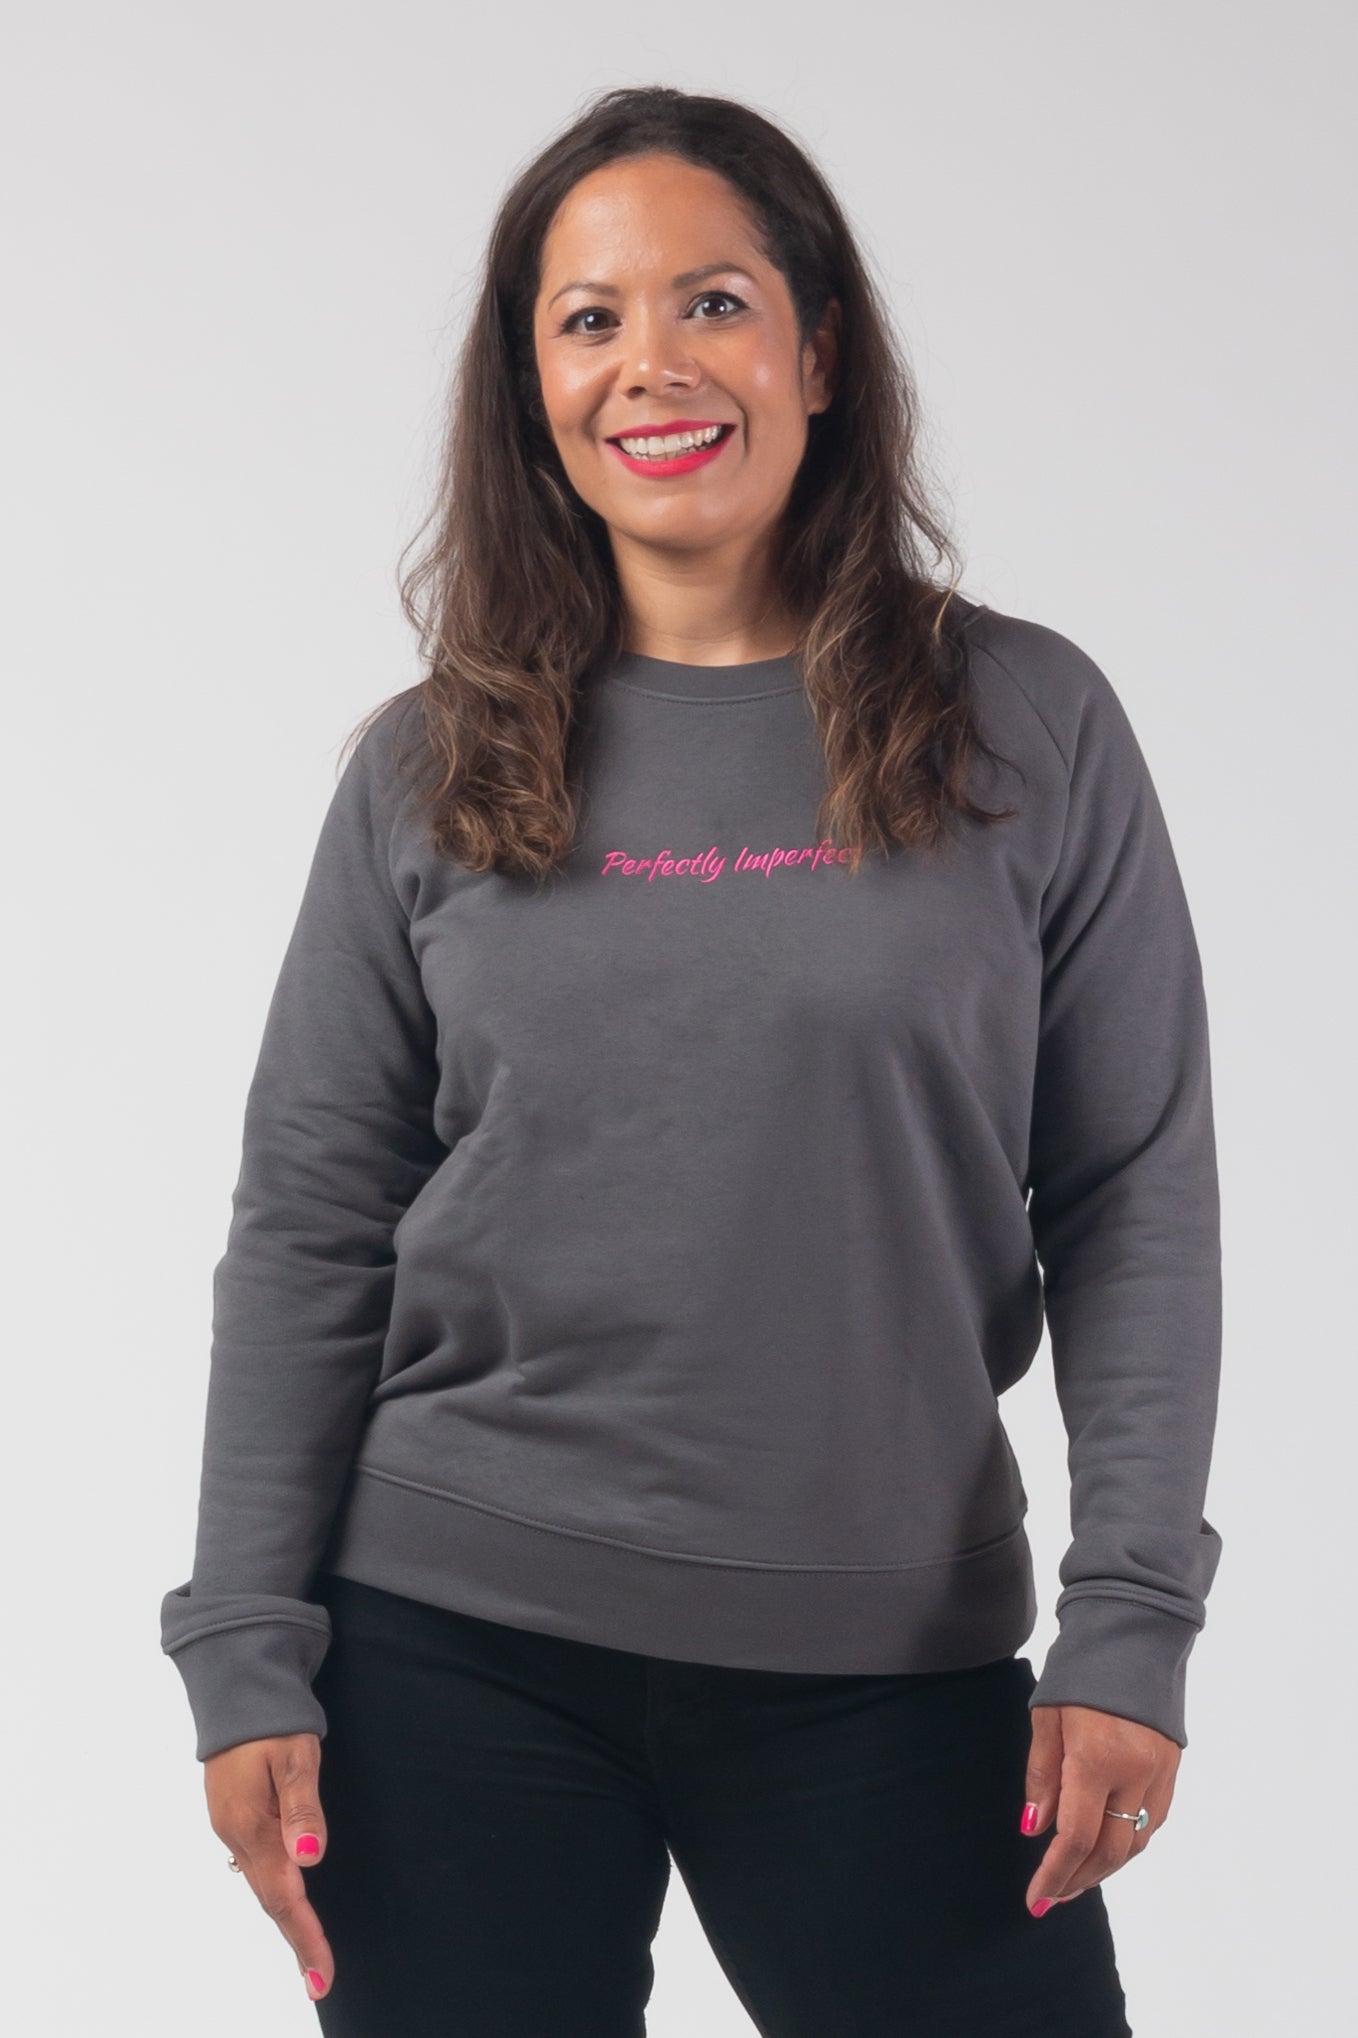 "Perfectly imperfect" Sweatshirt hot Pink /Charcoal - Embroidery